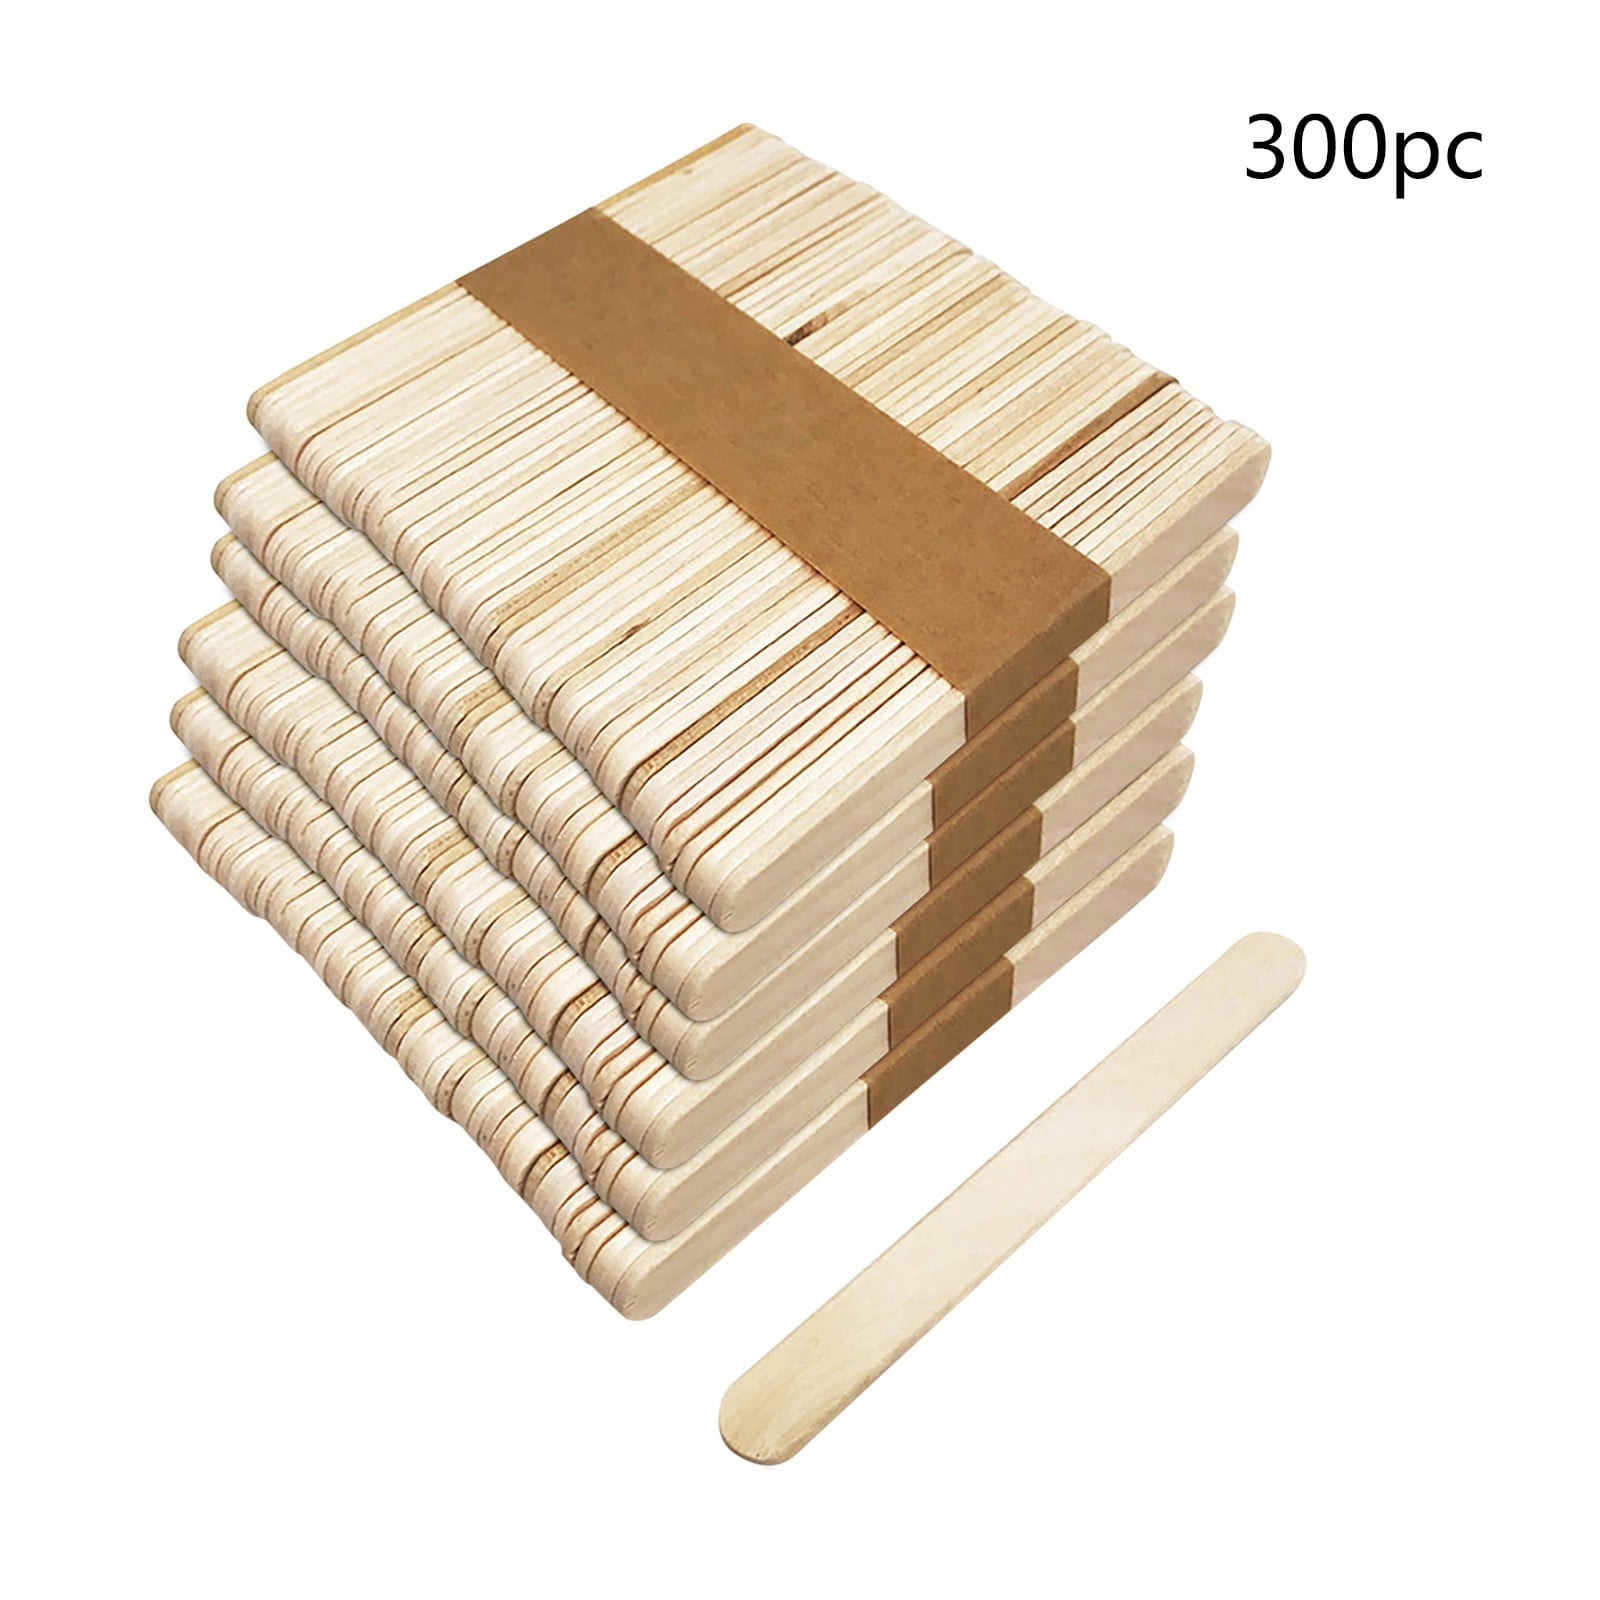 50/200pcs Wooden Craft Popsicle Sticks DIY Crafts, Home Art Projects,  Classroom Art Supplies, Used For Making Ice Cream, Waxing, Tongue  Suppressor Woo